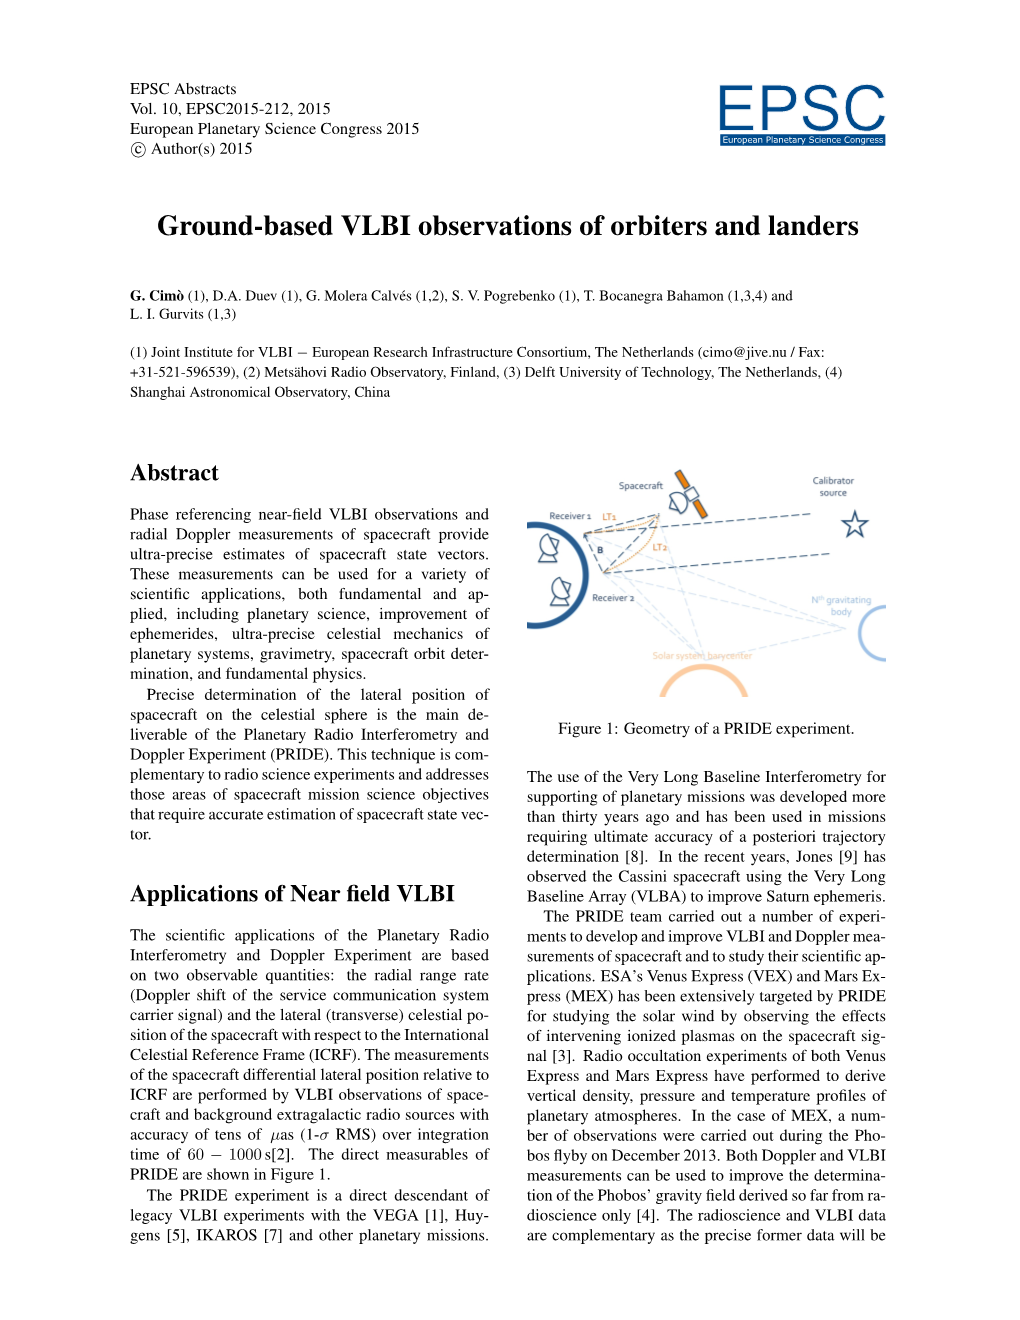 Ground-Based VLBI Observations of Orbiters and Landers